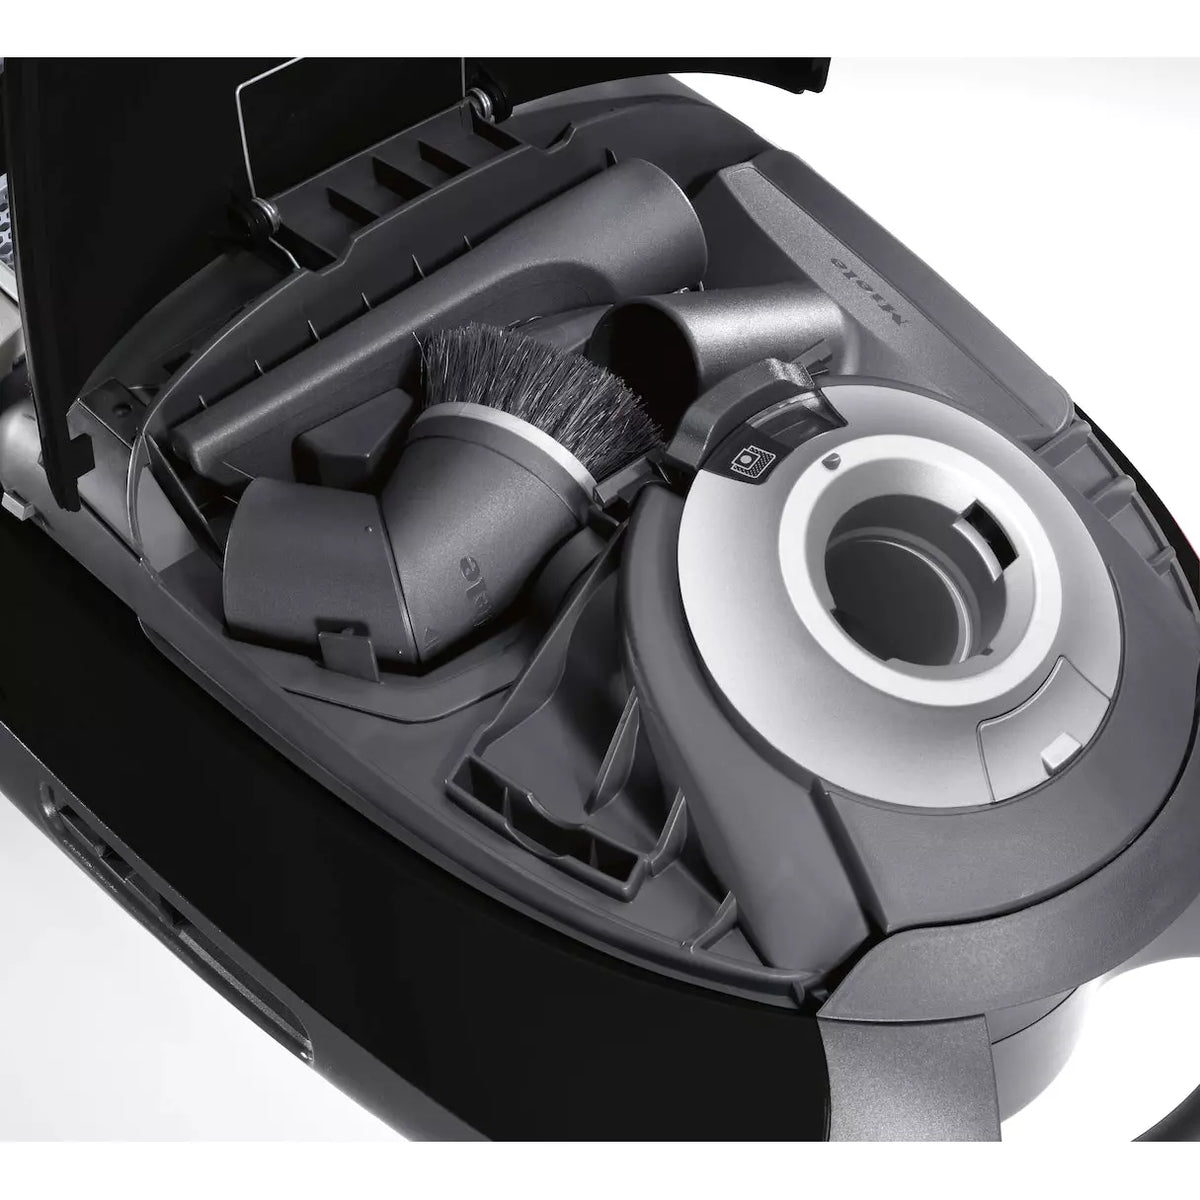 Miele Complete C2 Flex Powerline Cylinder Vacuum Cleaner - Obsidian Black | C2 BLACK from Miele - DID Electrical